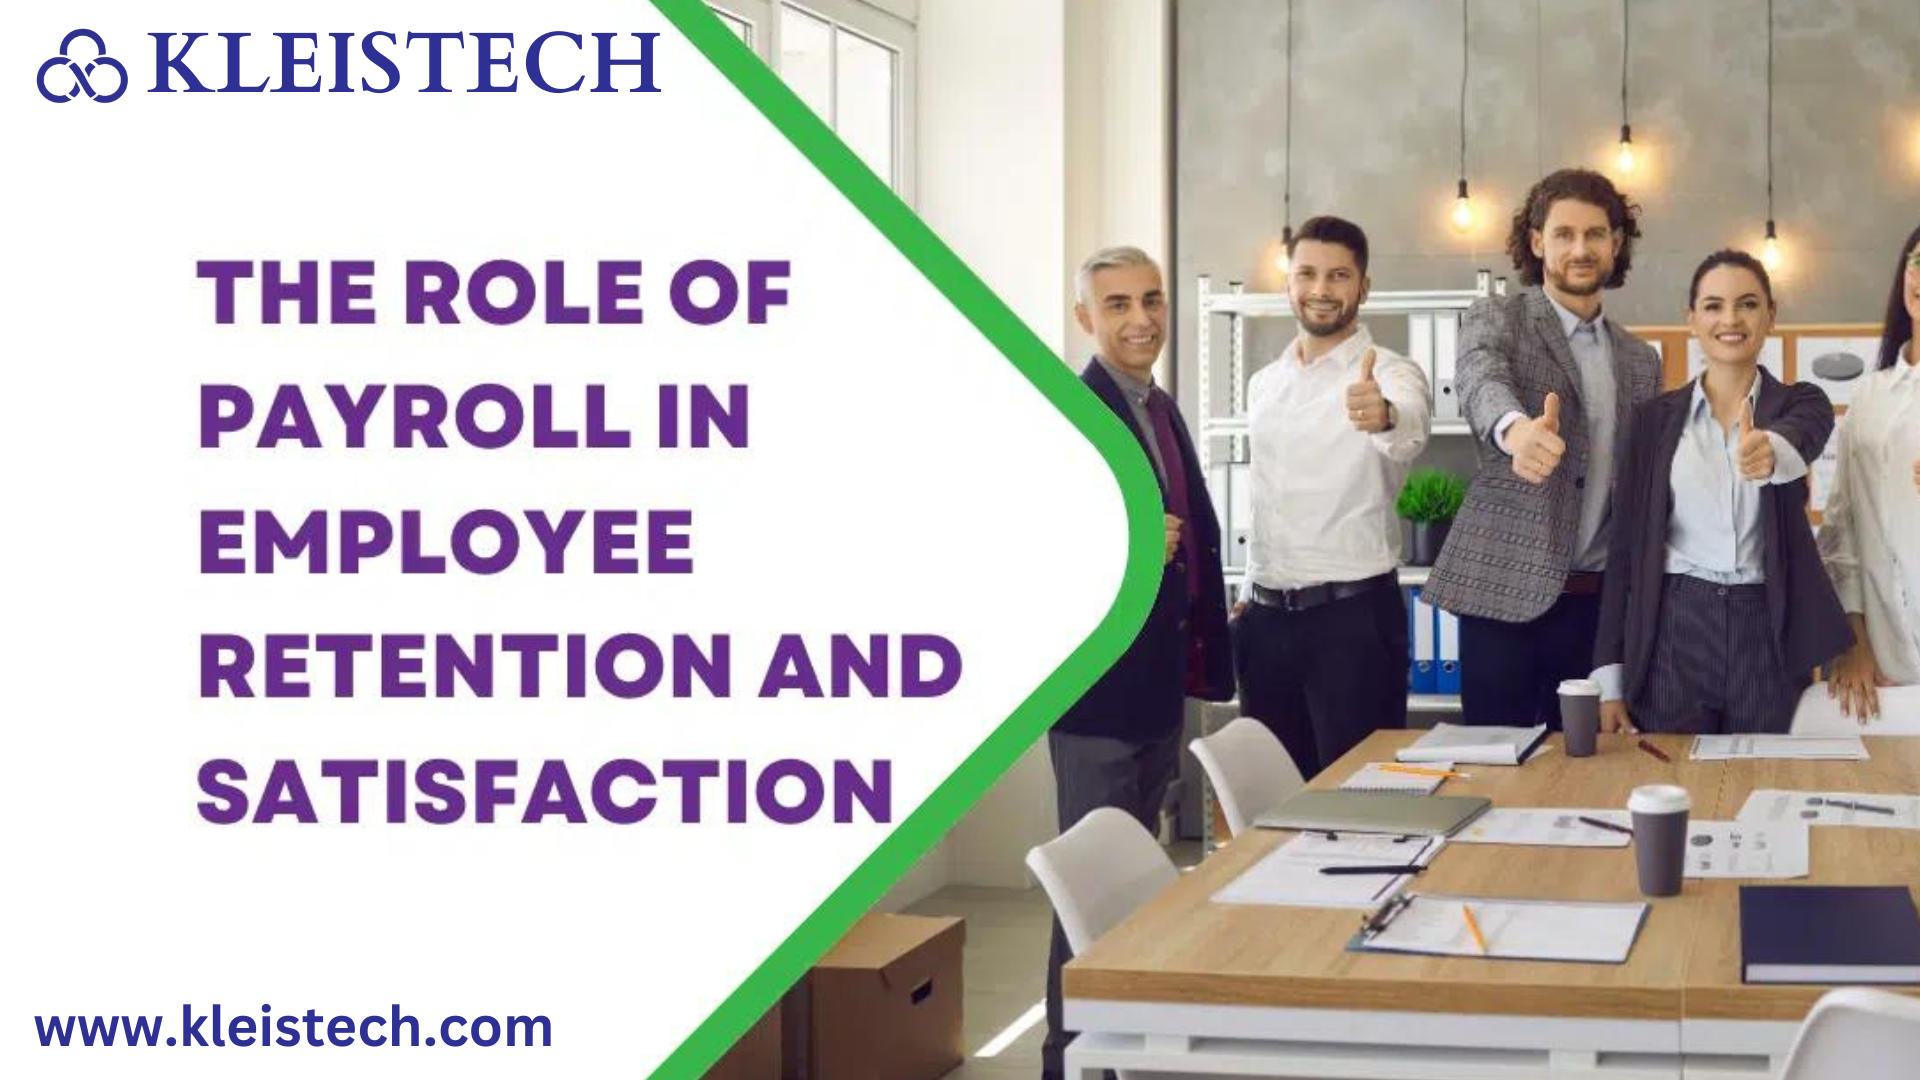 The Impact of Payroll Services on Employee Retention and Satisfaction